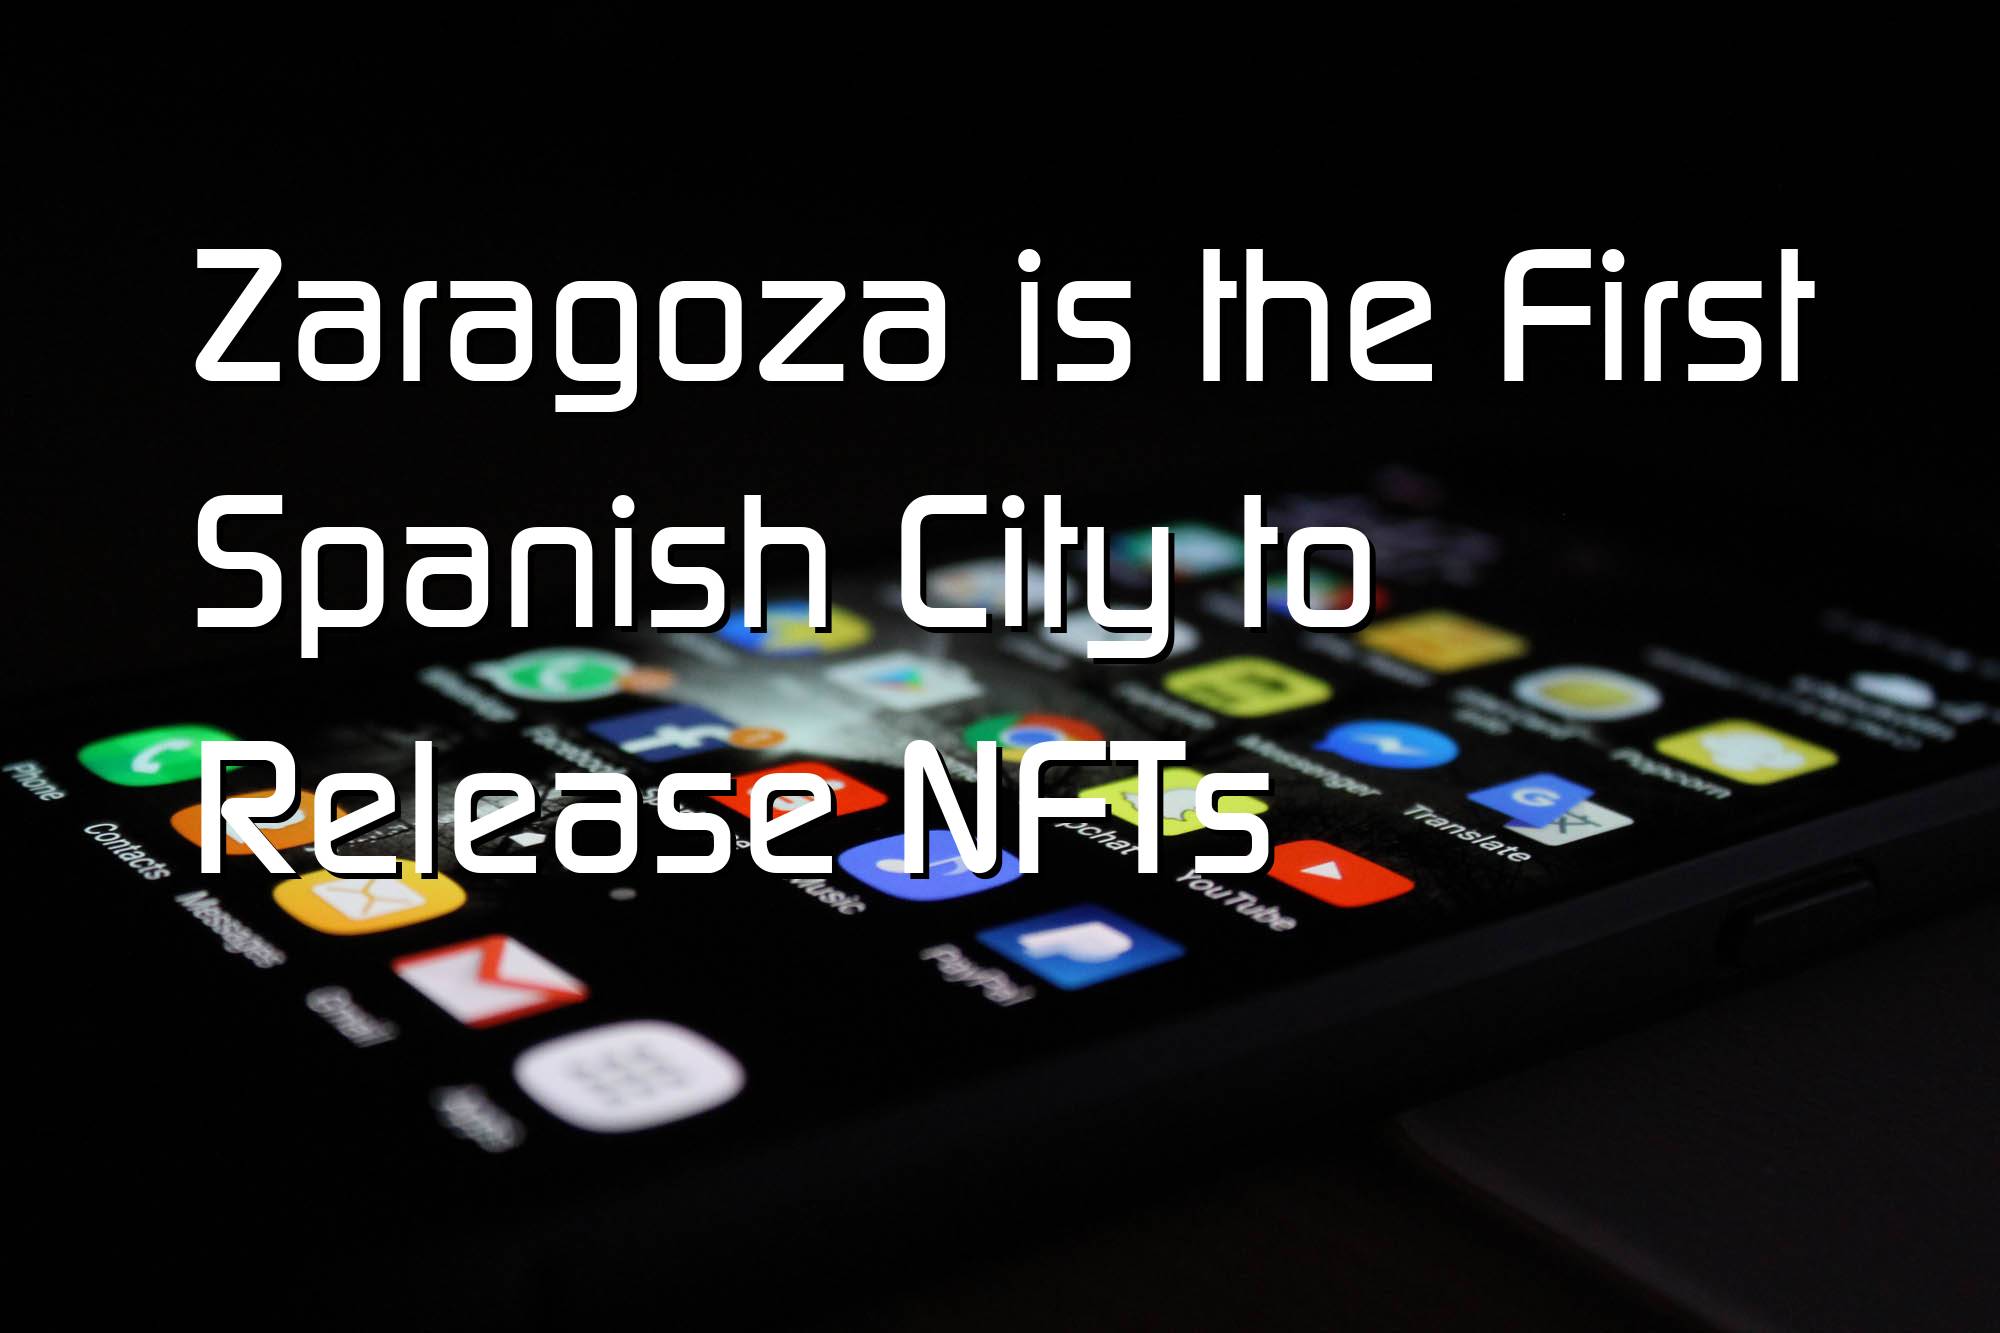 @$60137.88 Zaragoza is the First Spanish City to Release NFTs